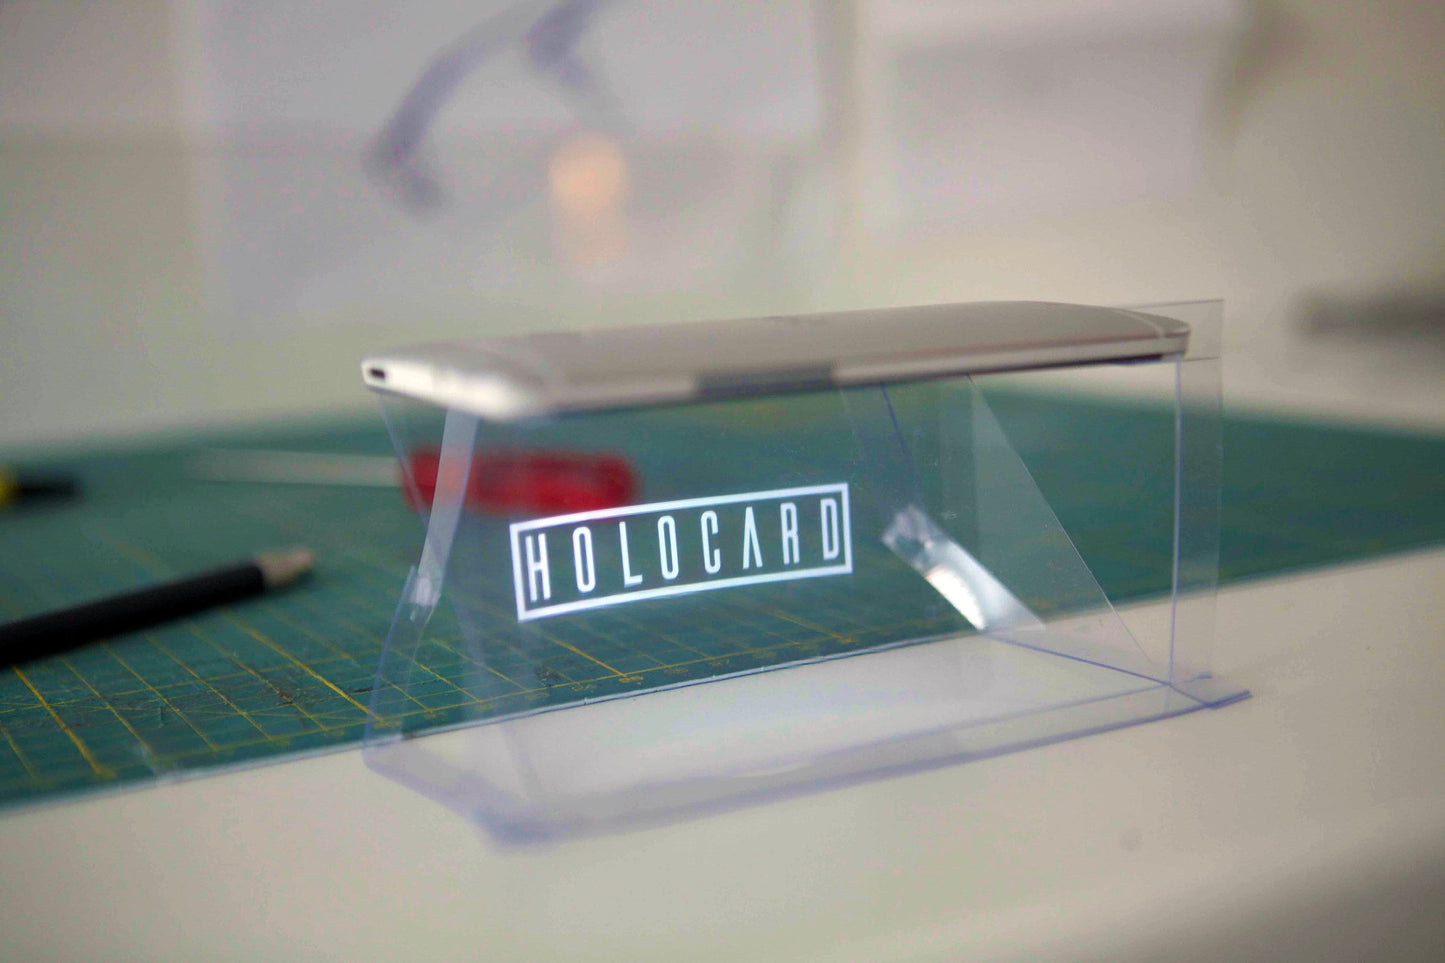 HOLOCARD | Hologram display for smartphones | Use this new tech gadget to view holograms with your smartphone | New tech accessory